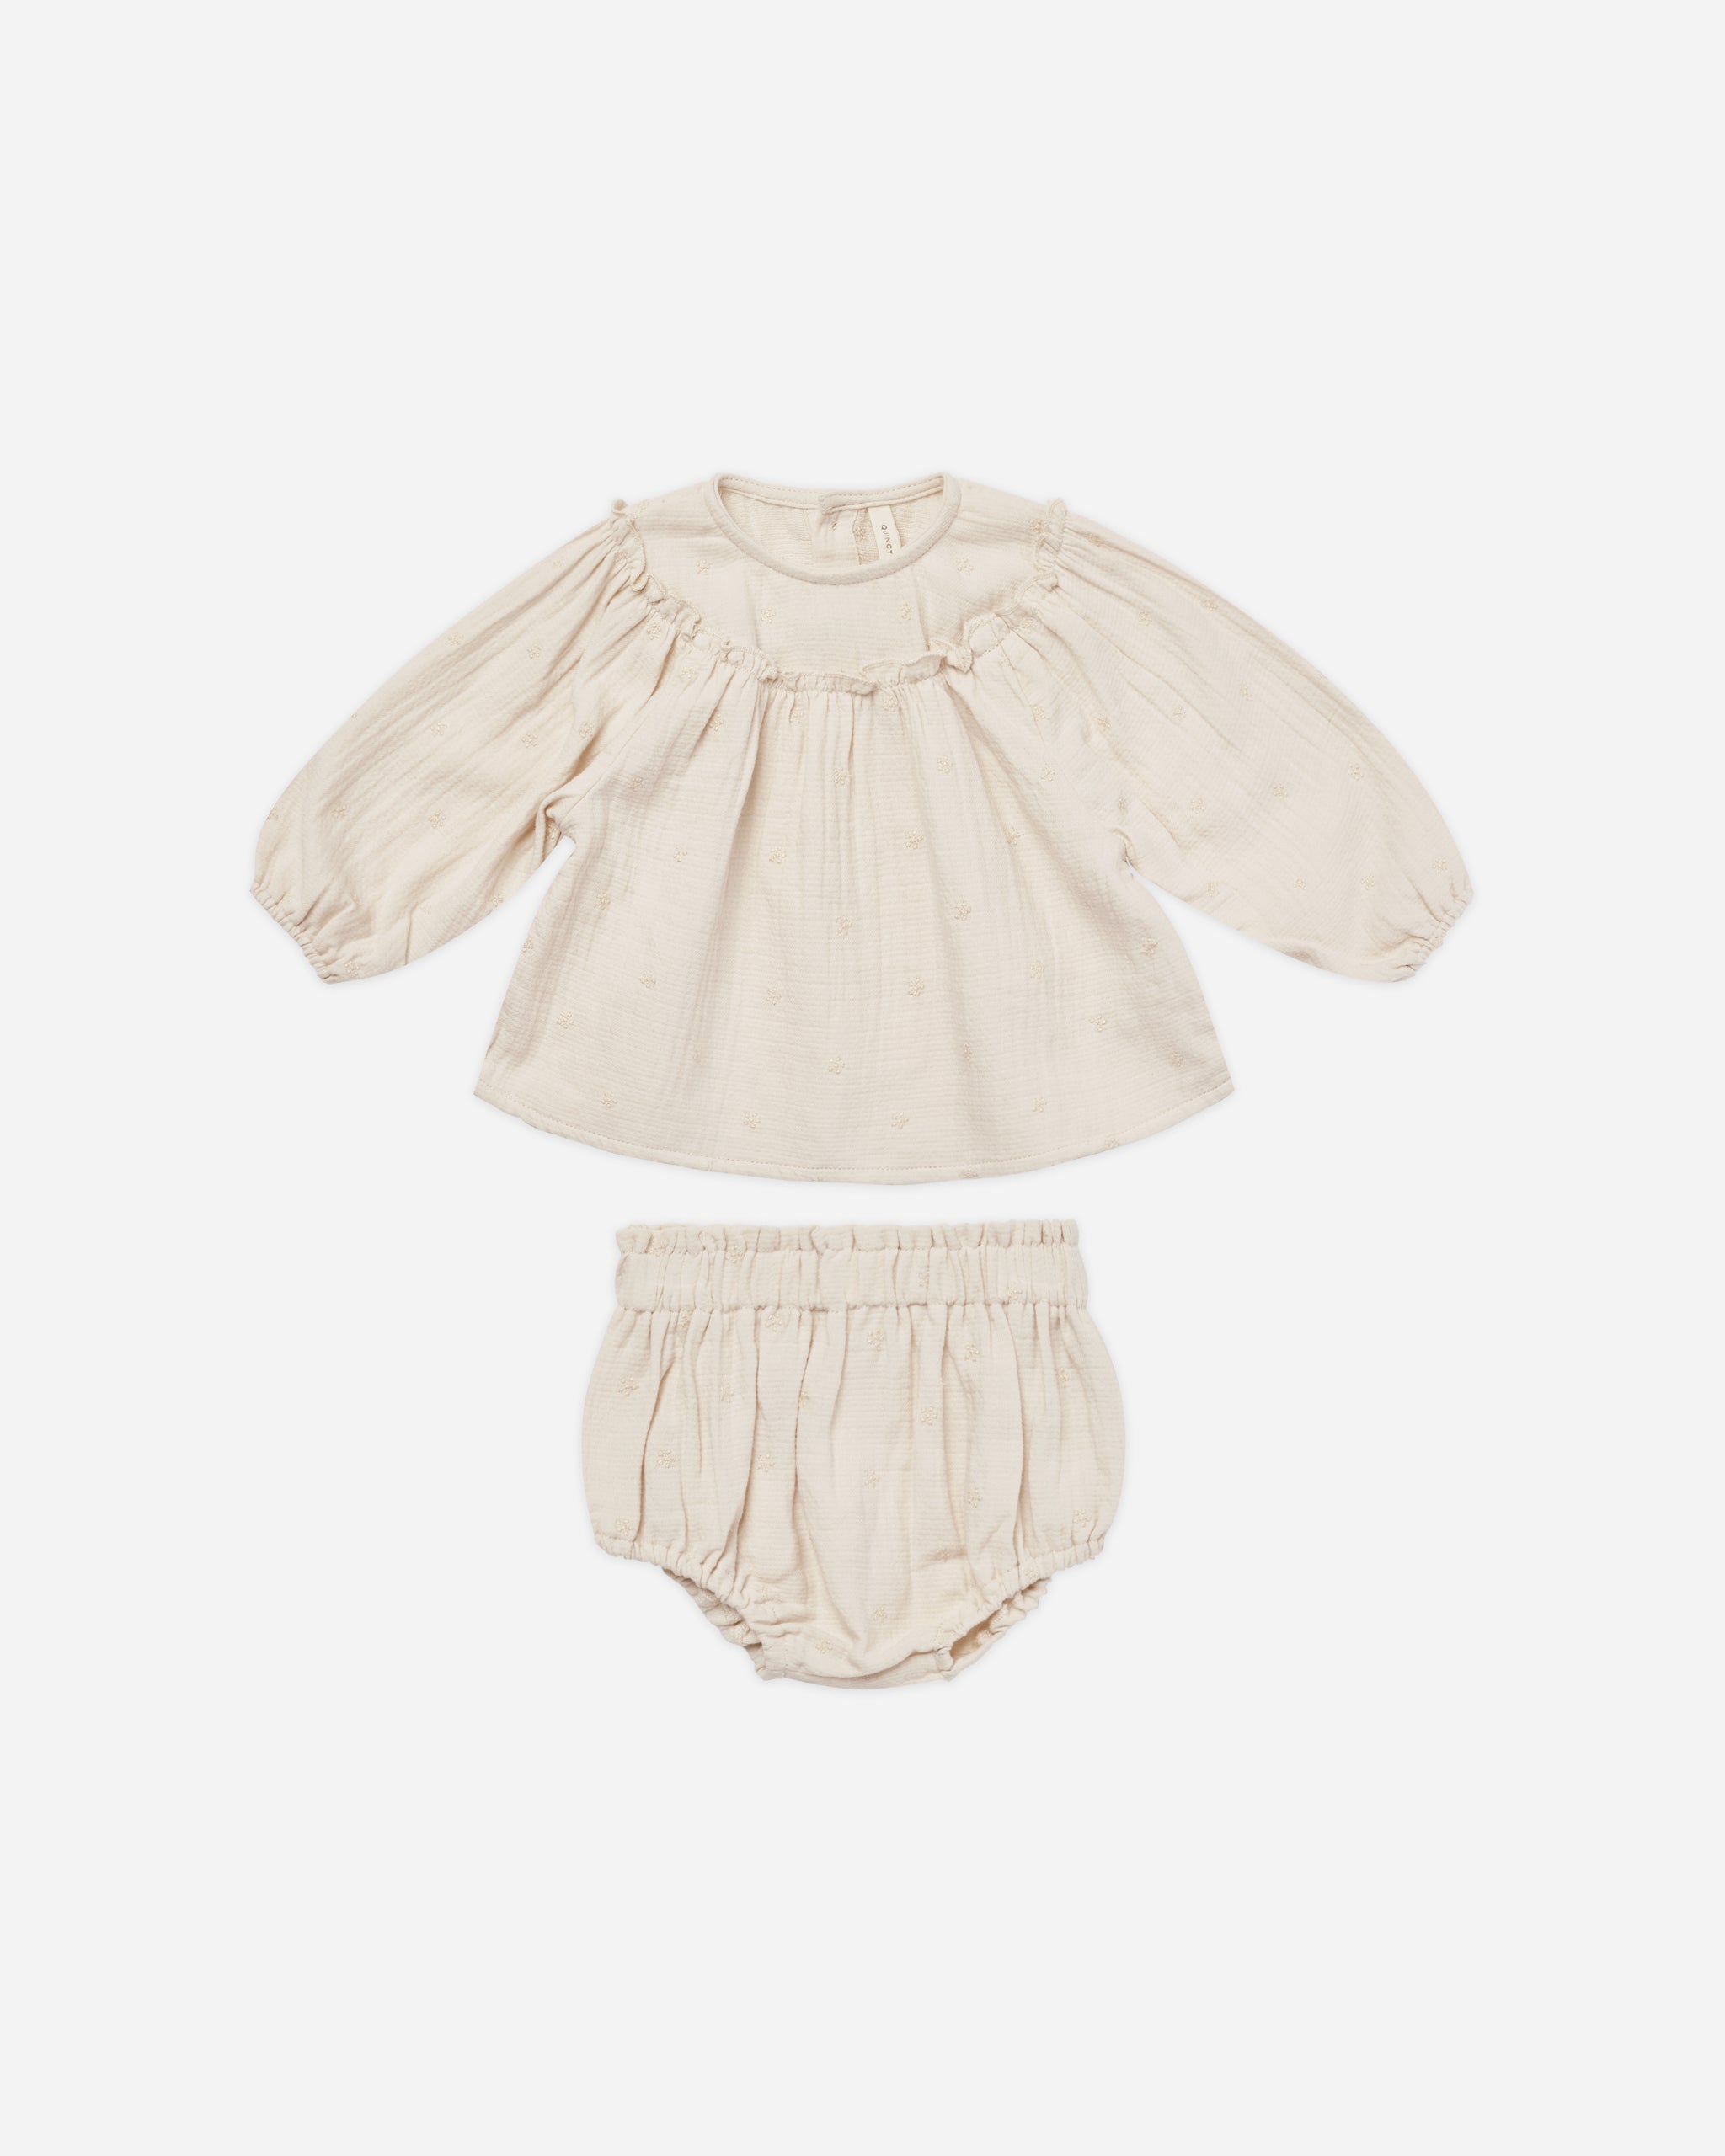 Balloon Sleeve Blouse + Bloomer Set || Daisy Embroidery - Rylee + Cru | Kids Clothes | Trendy Baby Clothes | Modern Infant Outfits |